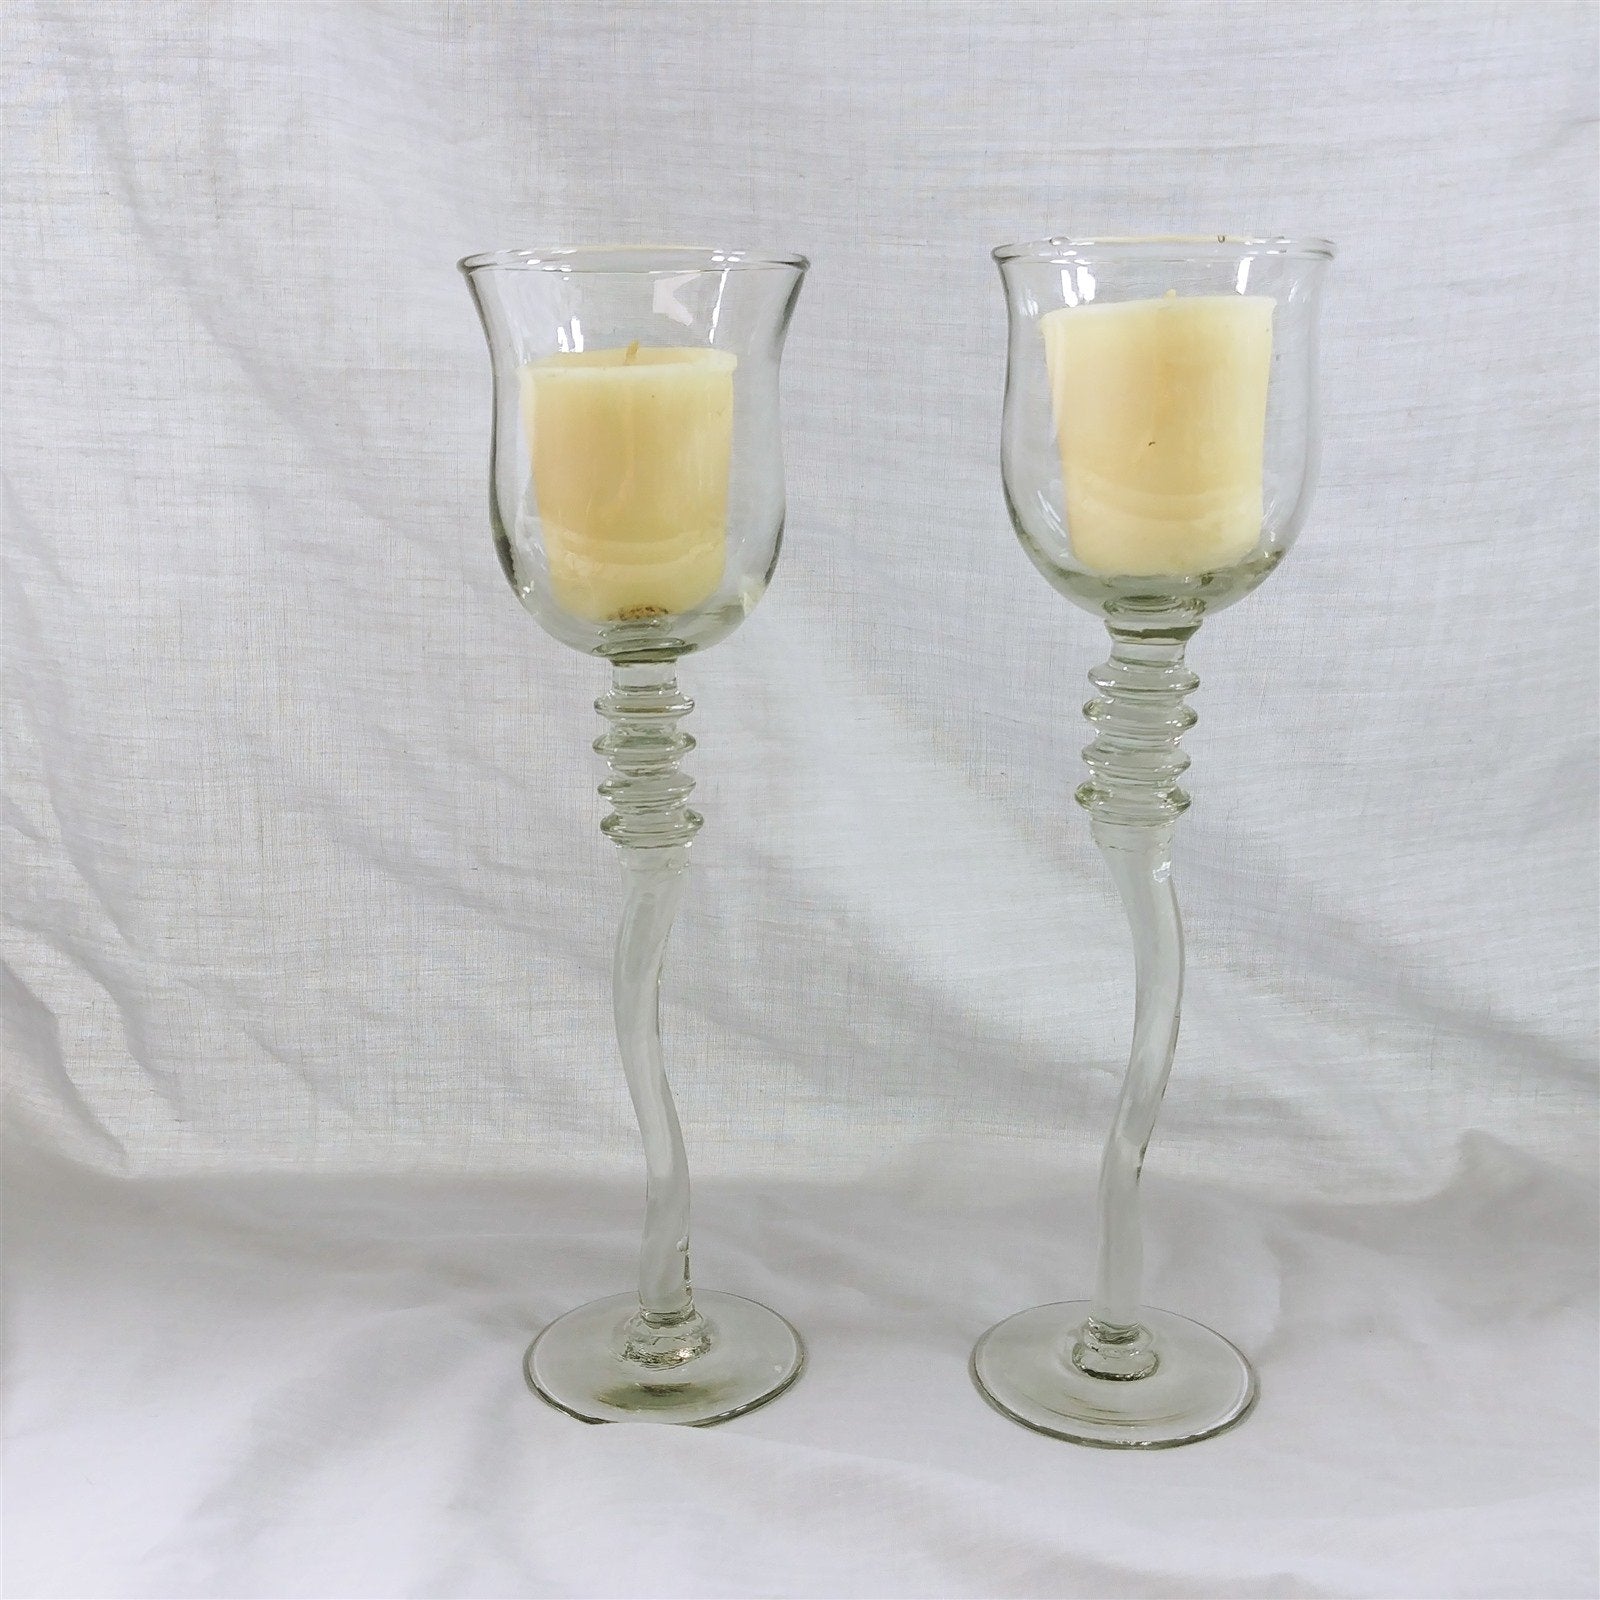 Cordial Aperitif Glasses or Votive Candle Holders Curvy Stems